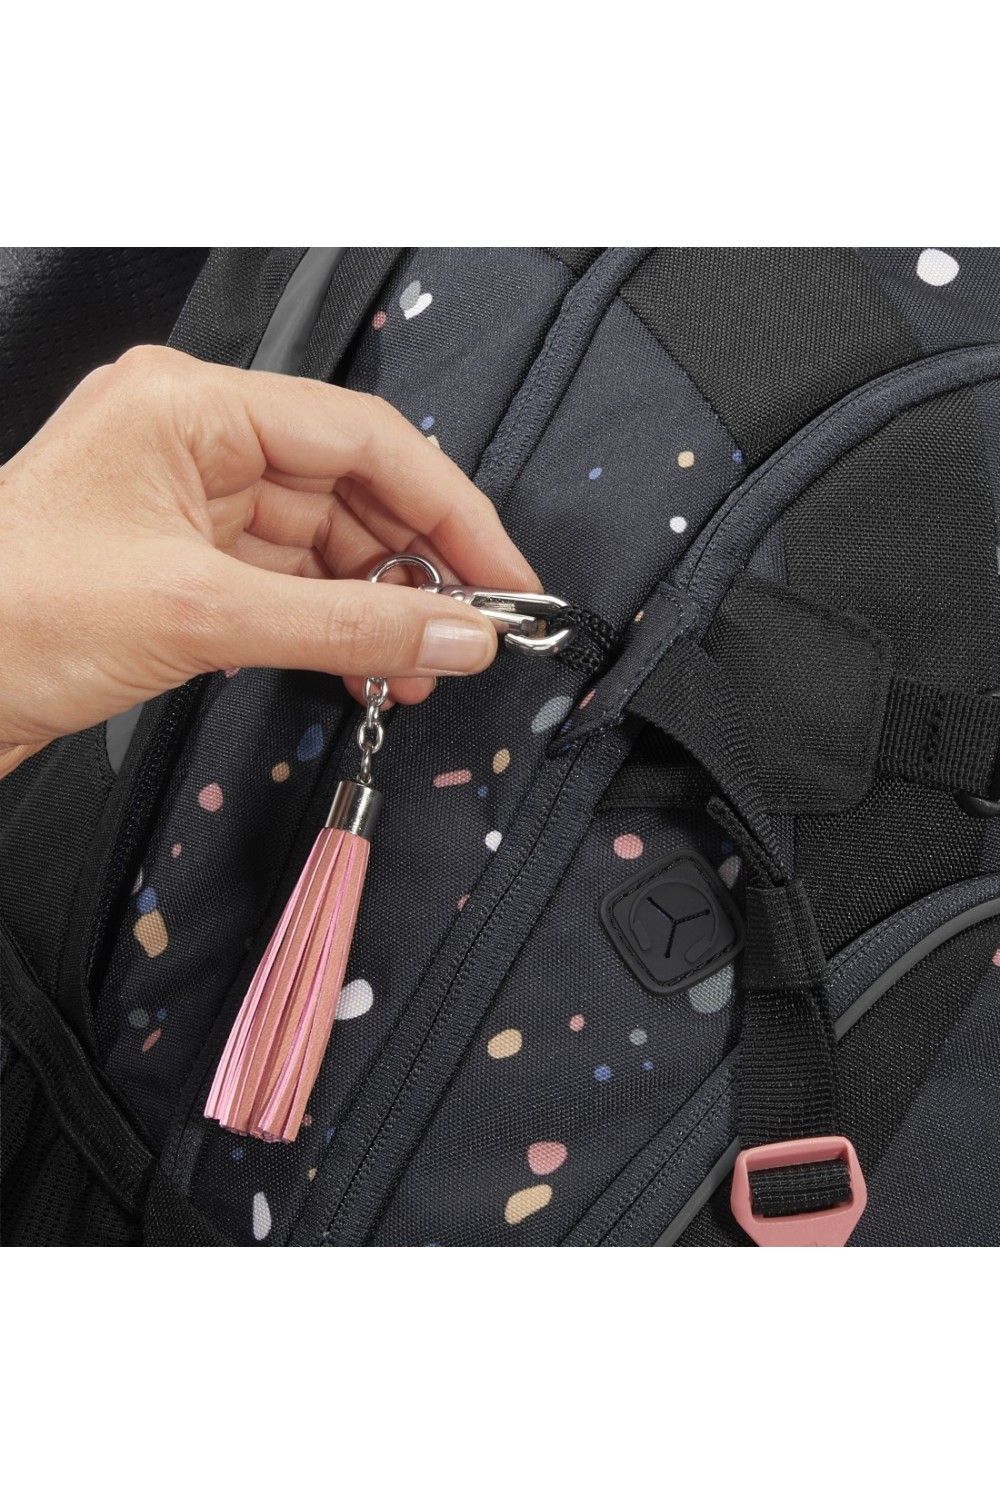 Schulrucksack Coocazoo MATE Sprinkled Candy